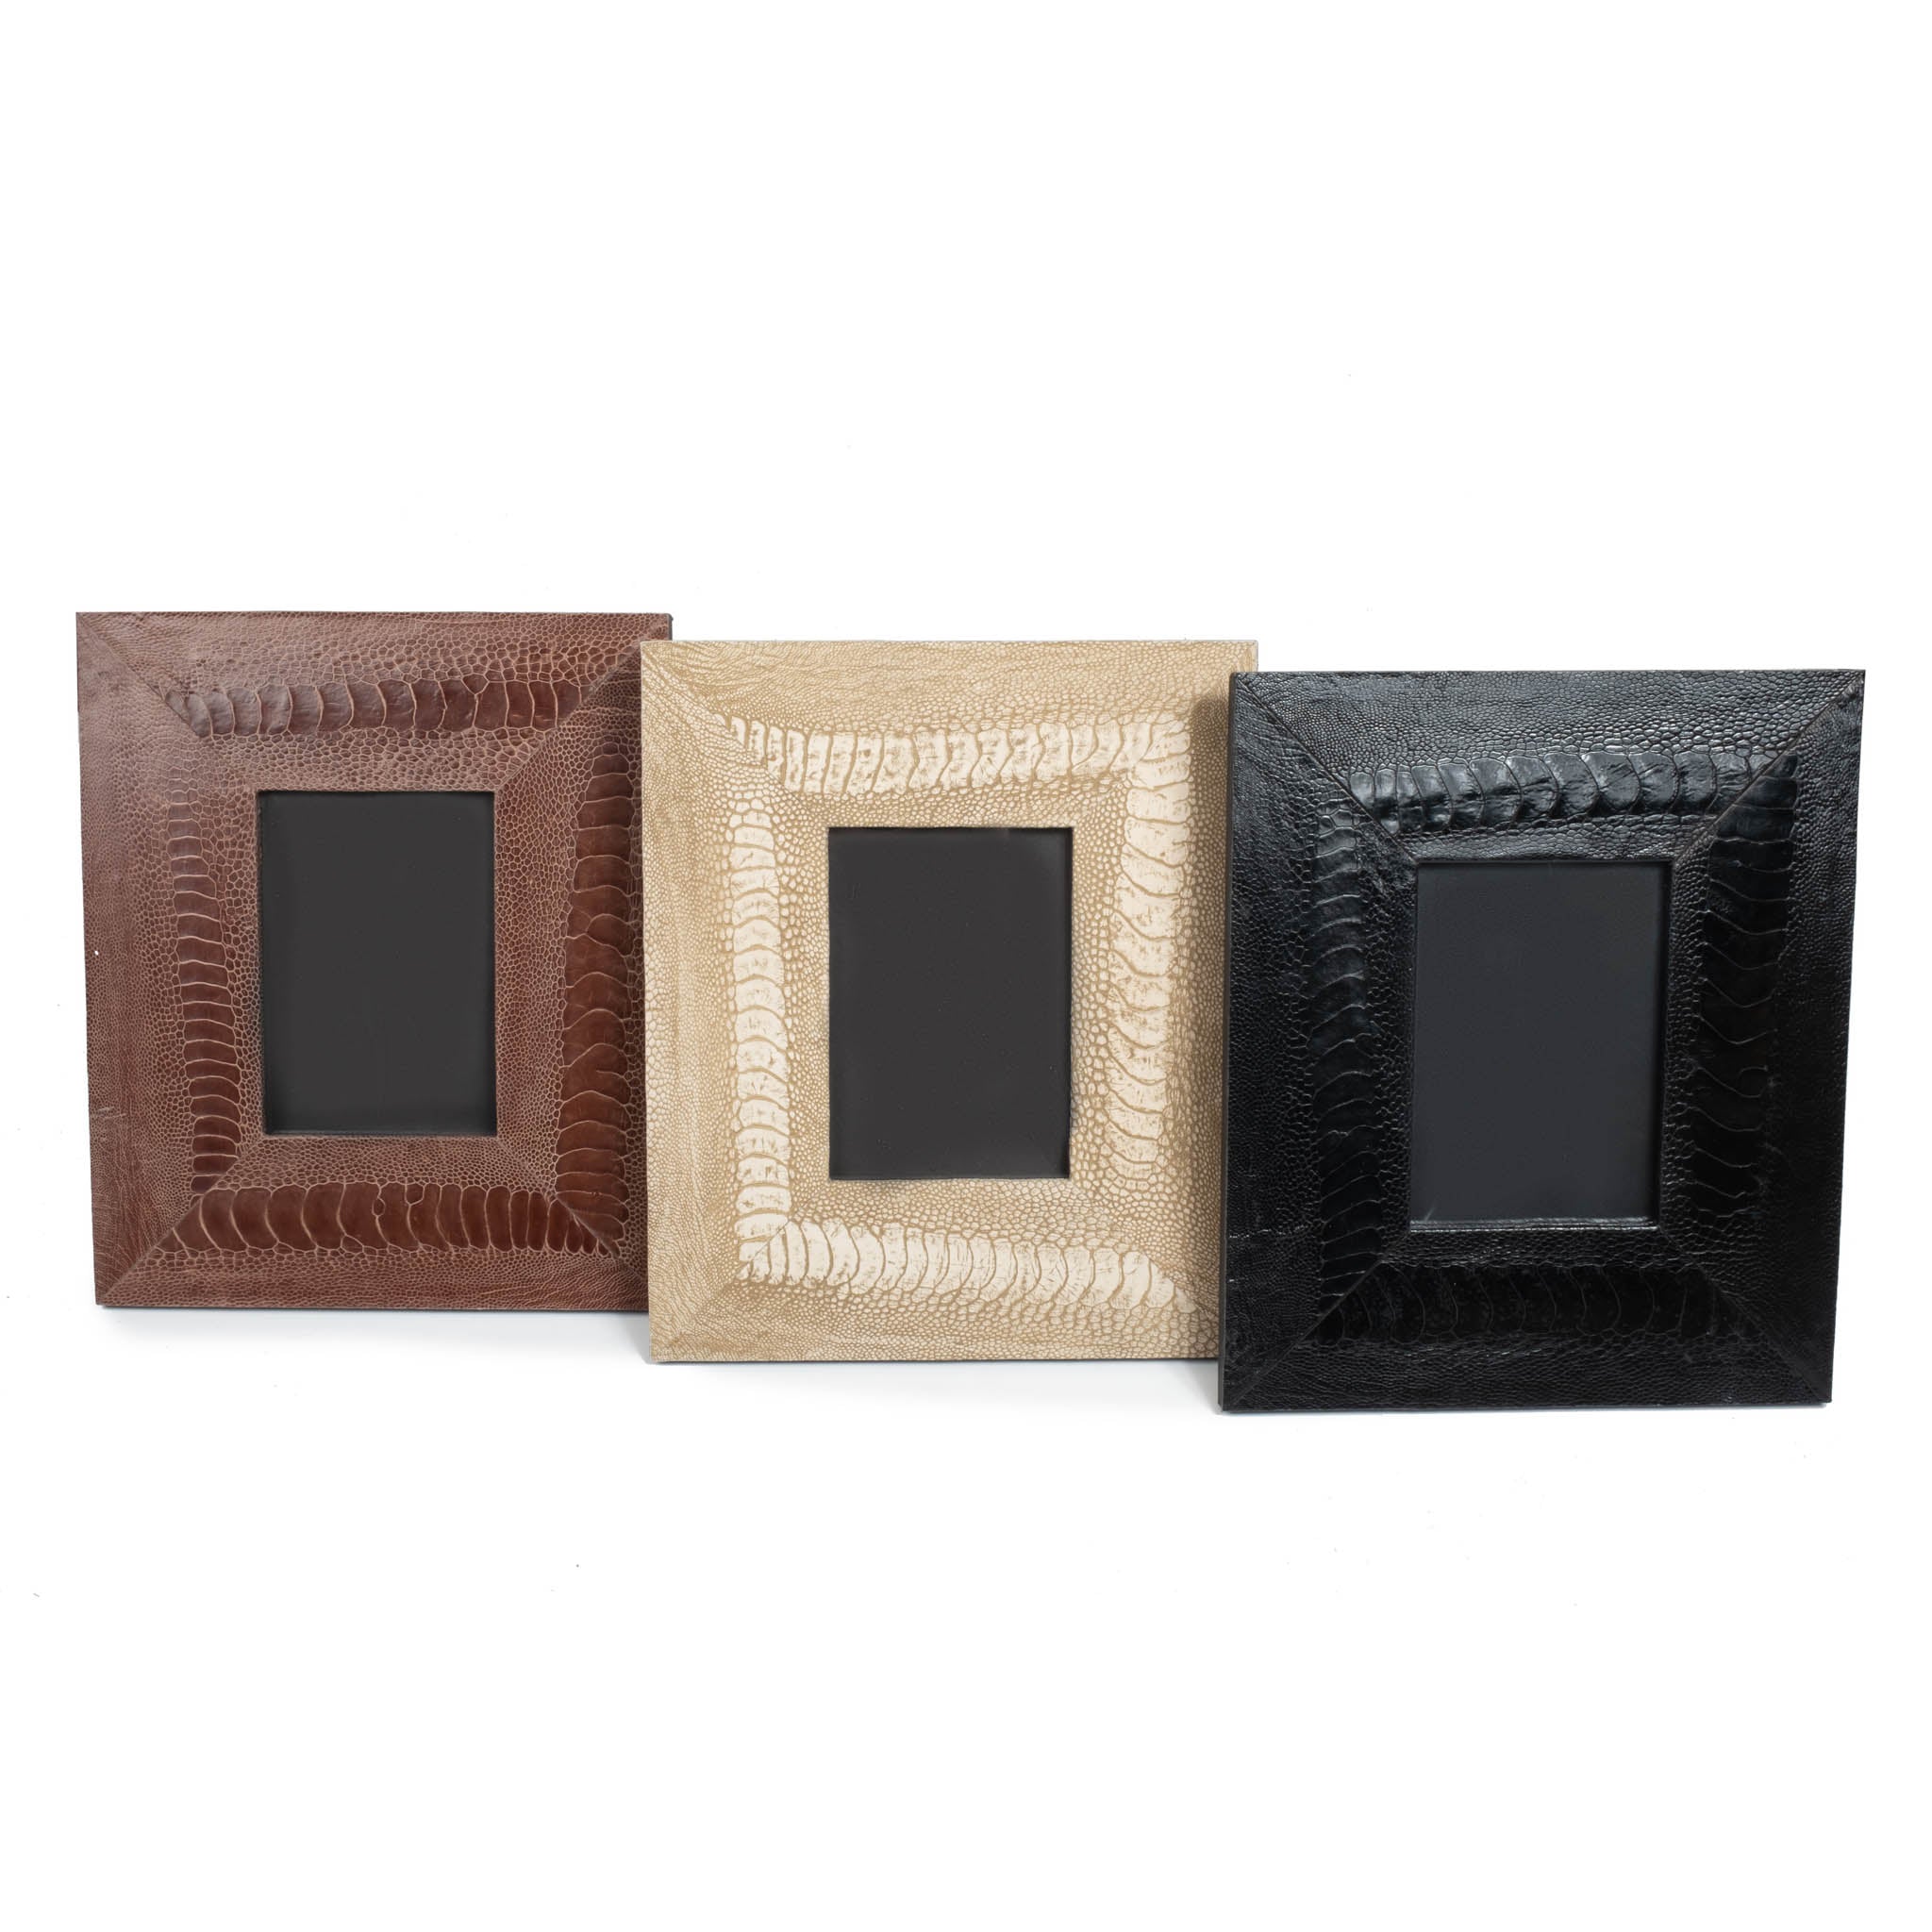 Ostrich Shin Leather Photo Frame - Brown